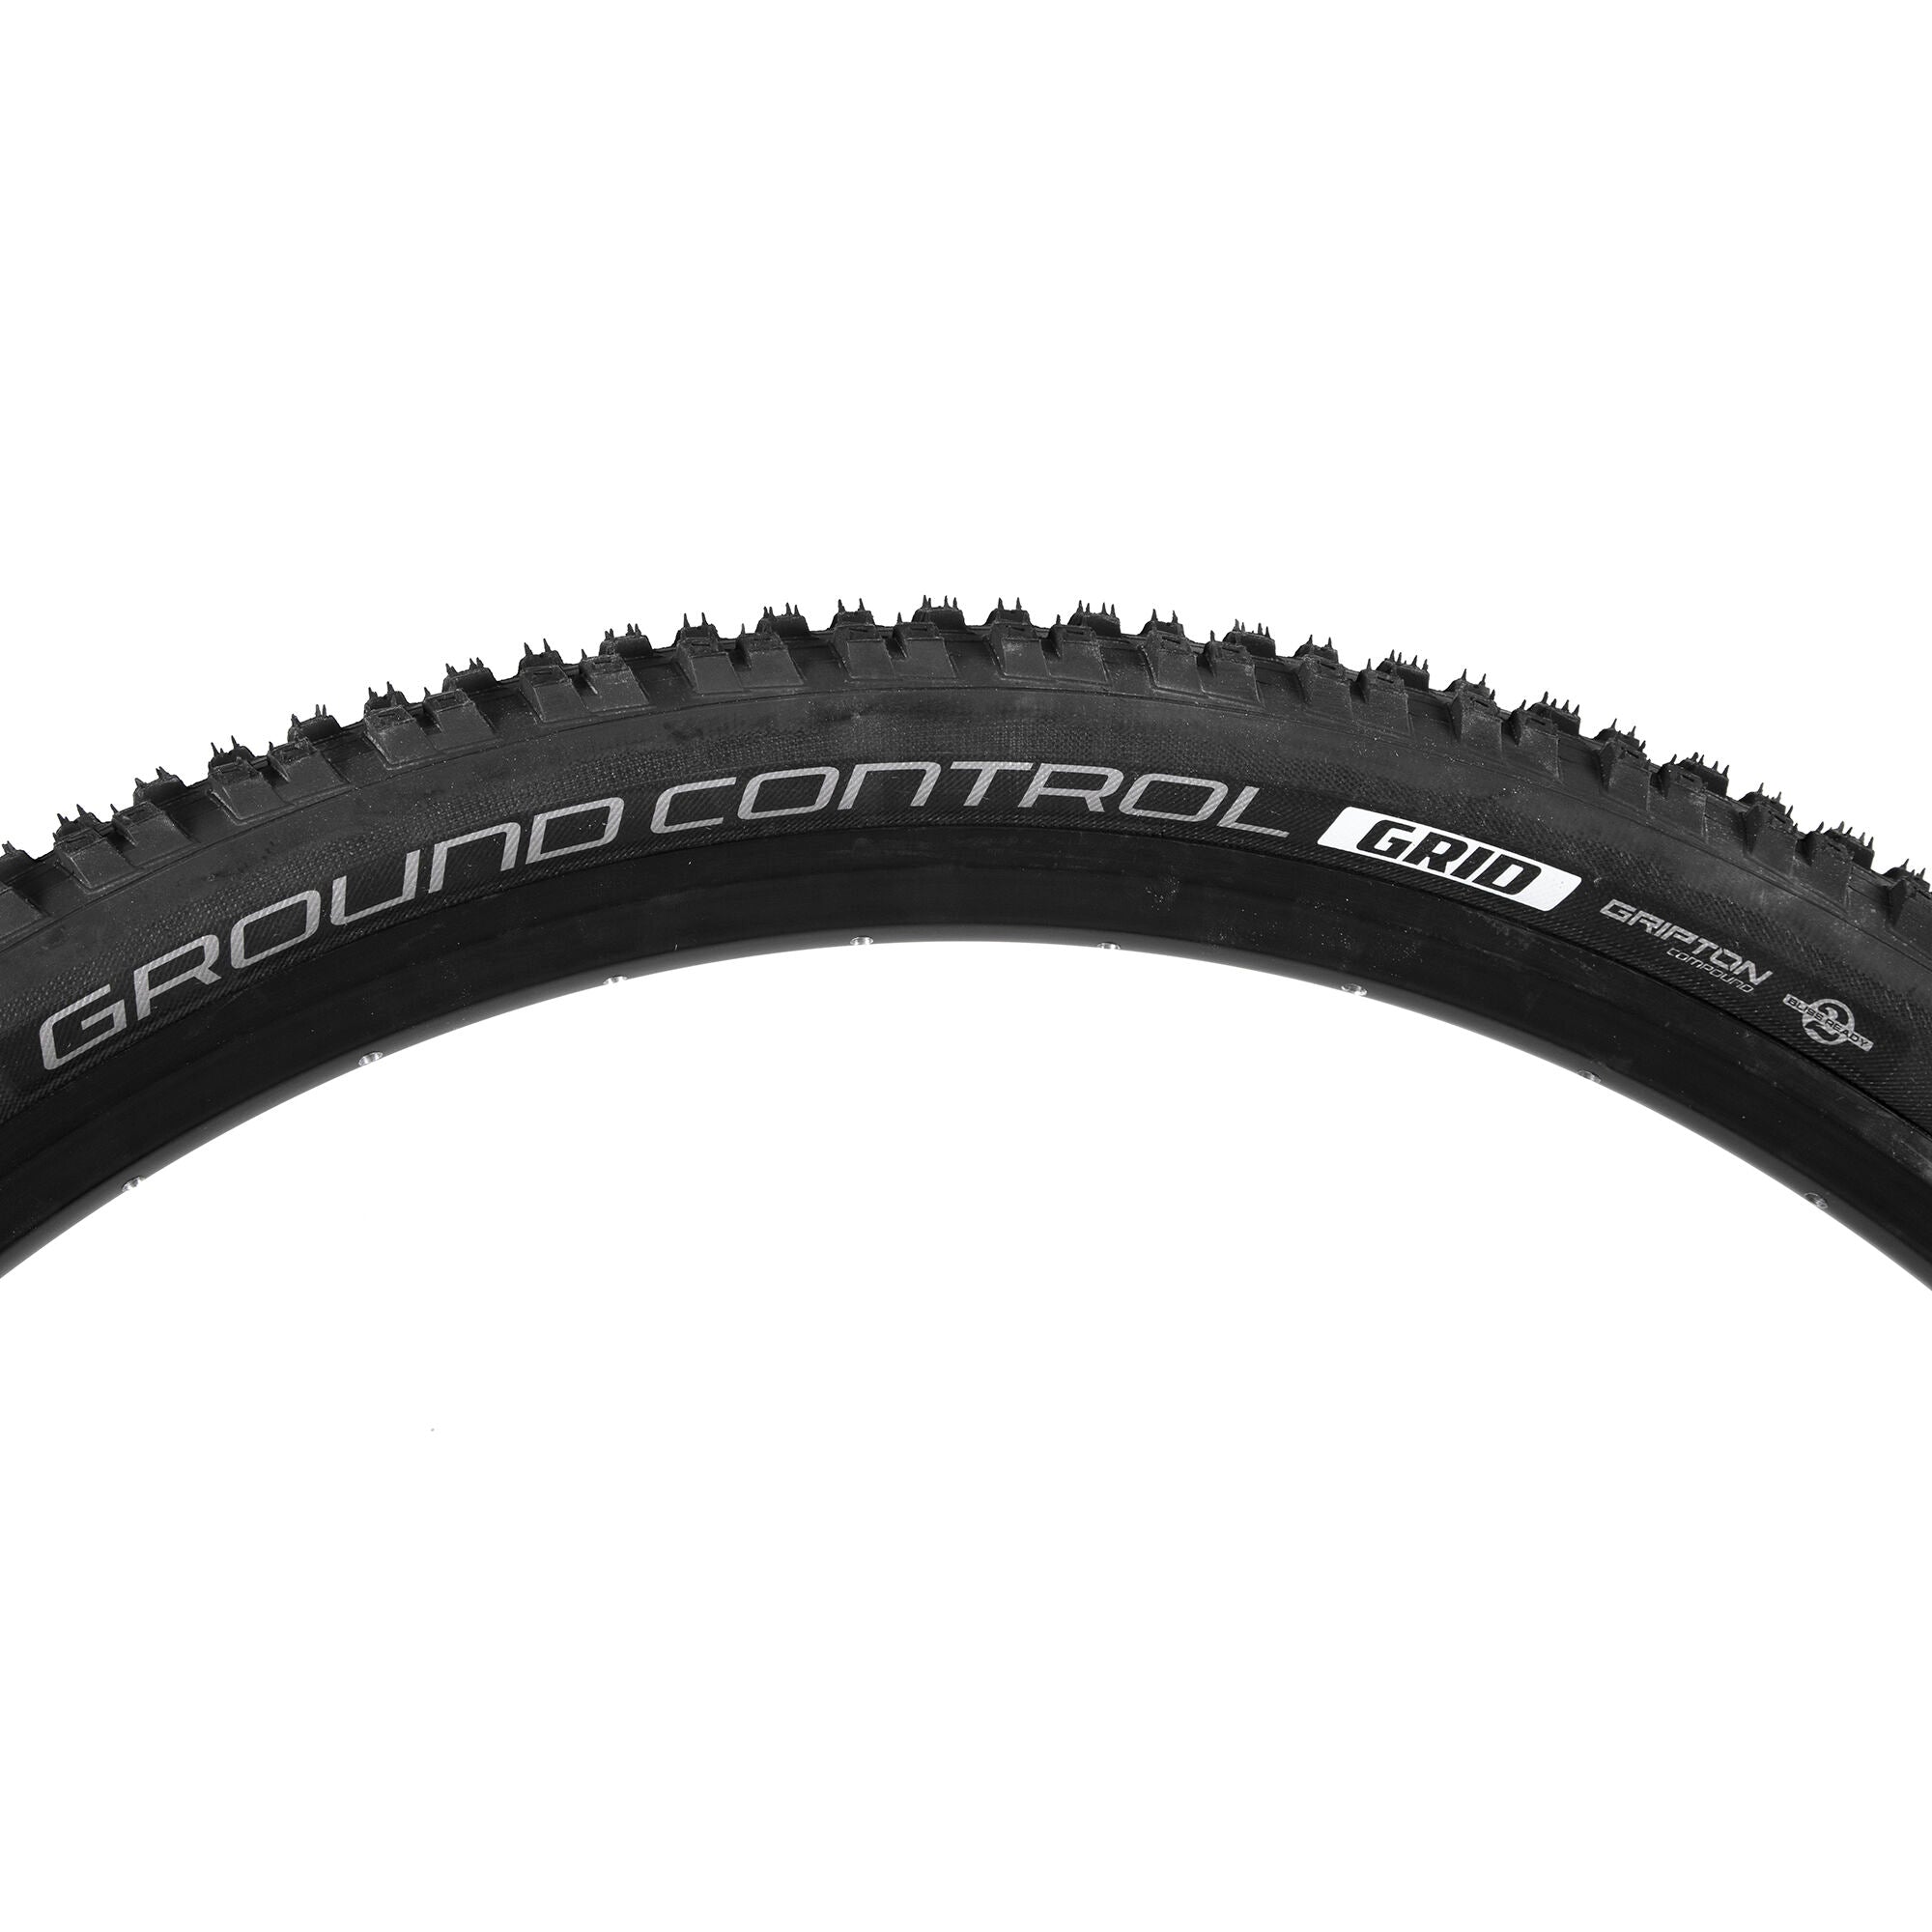 SPECIALIZED GROUND CONTROL GRID 2BLISS READY GRID TIRE 27.5x2.30